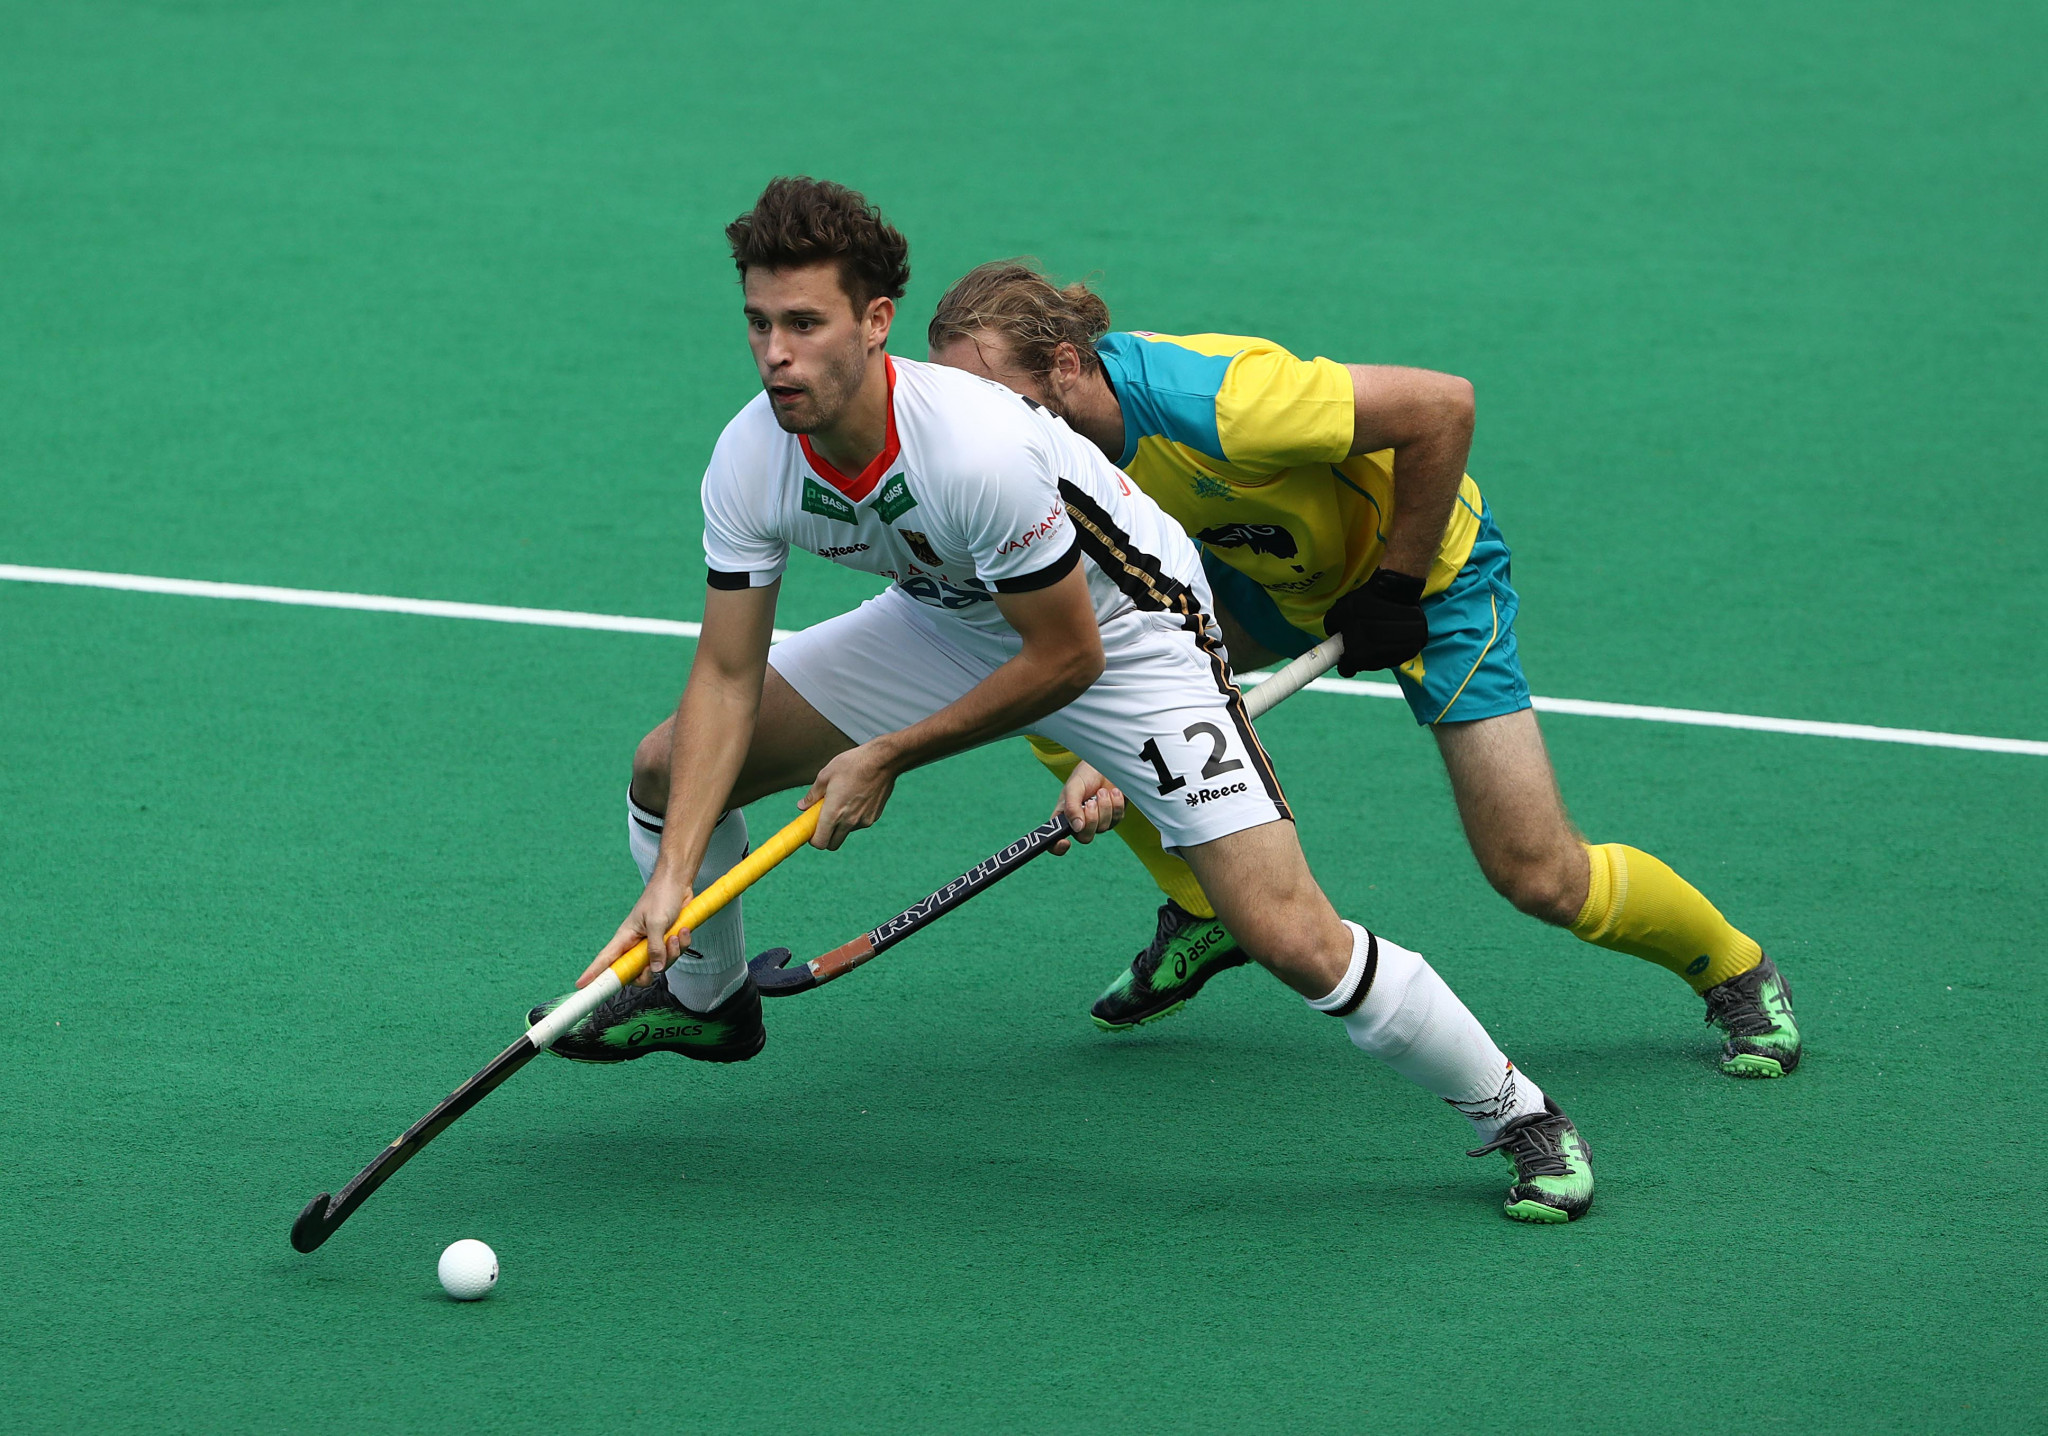 Australia's men and women overcame Germany in contrasting fashion in the FIH Pro League in Hobart ©Getty Images